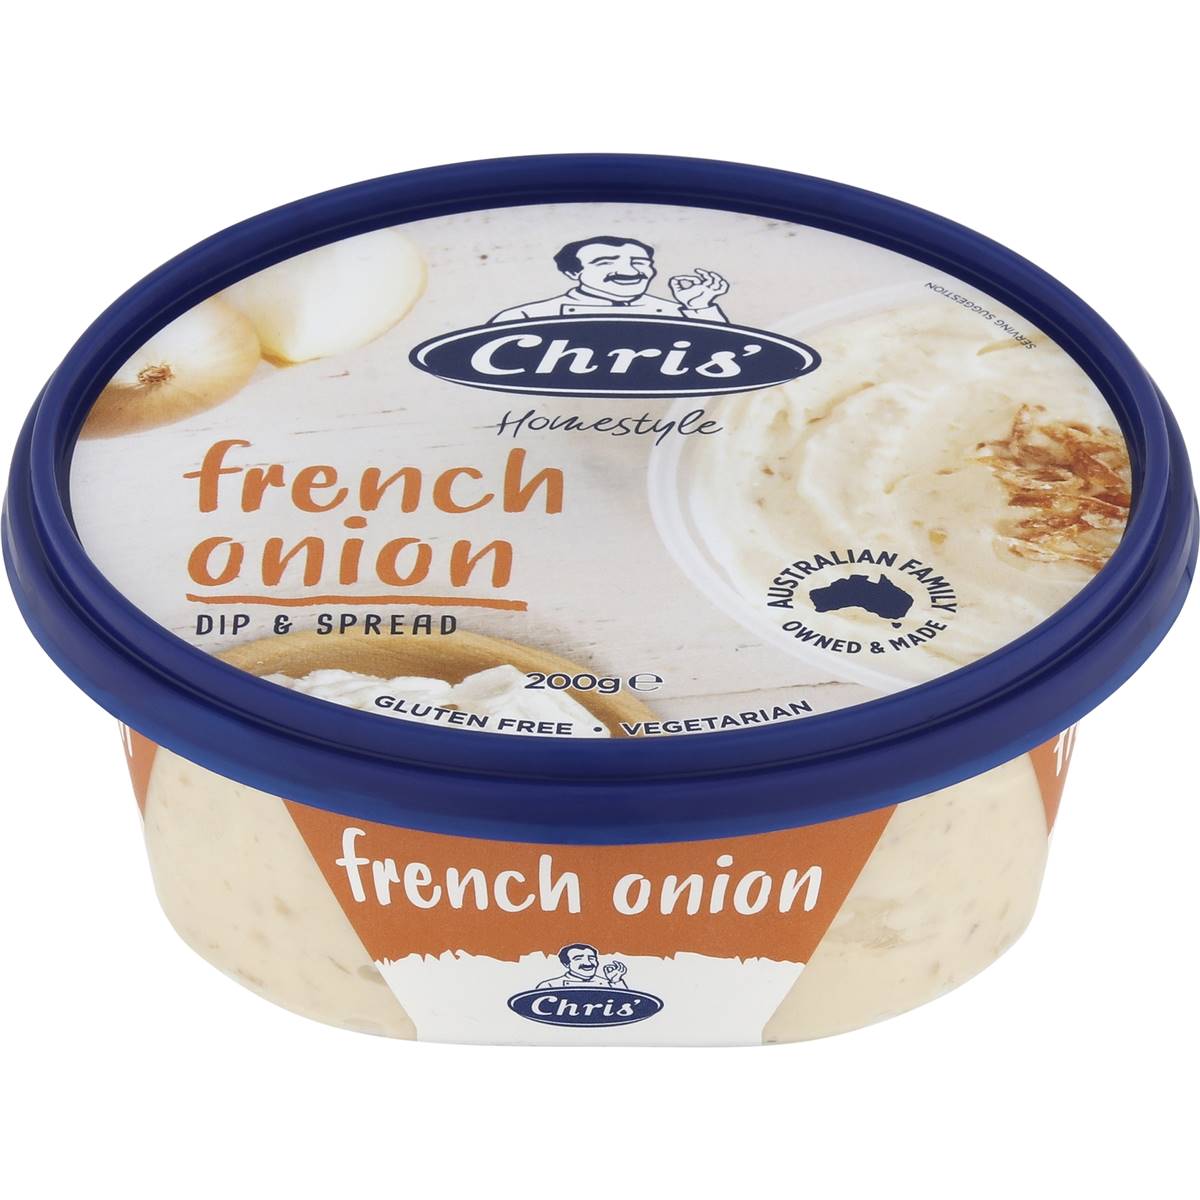 Calories in Chris' Traditional French Onion